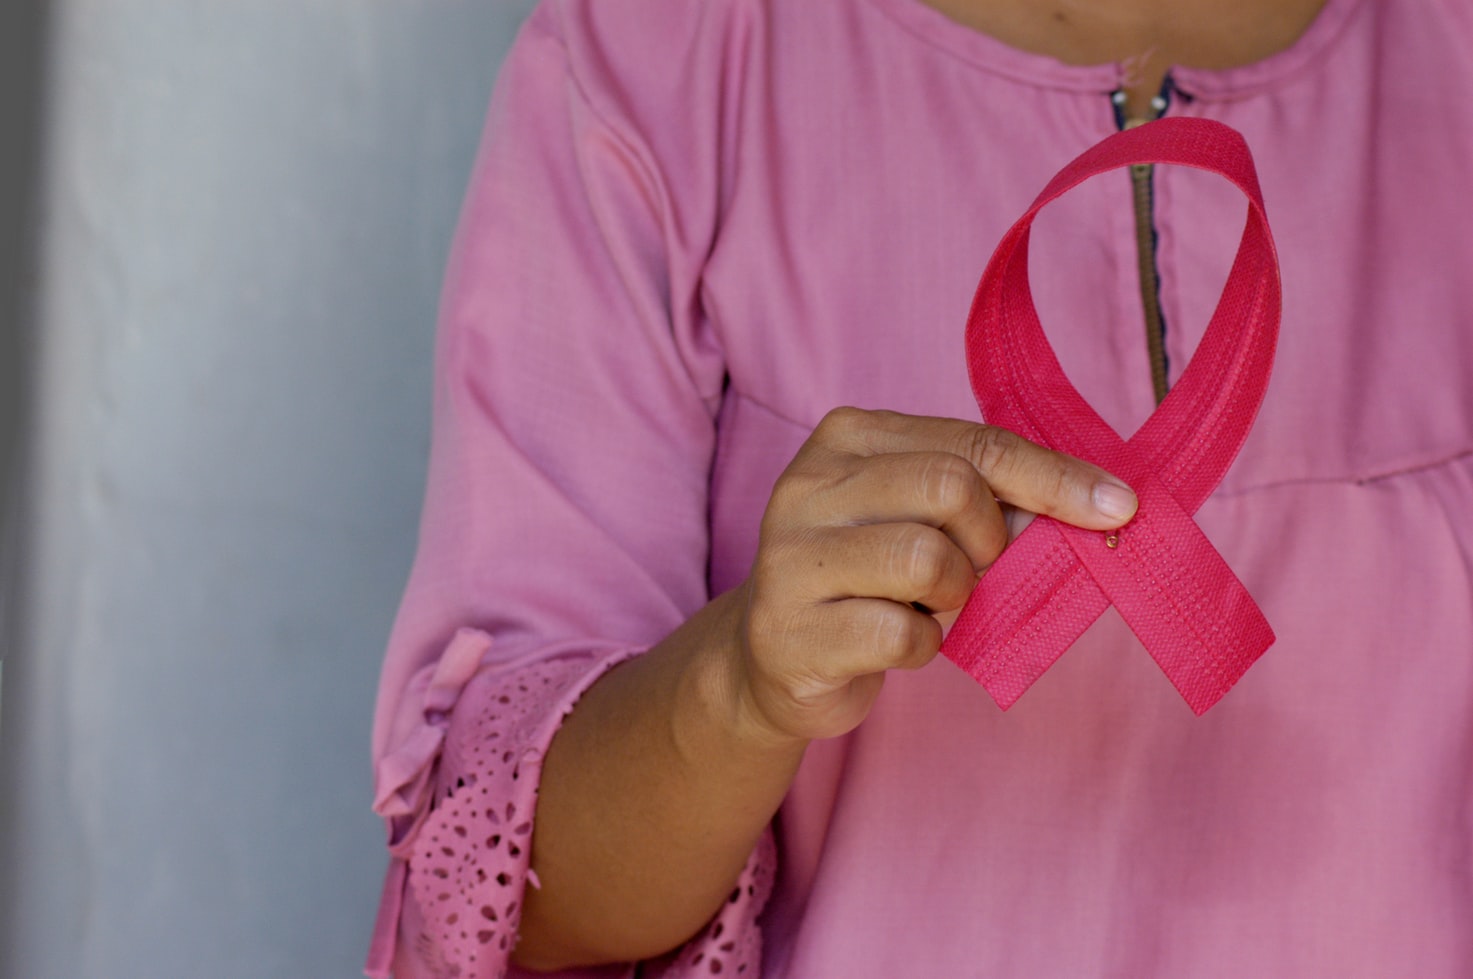 6 Simple Steps To Lower Your Breast Cancer Risk